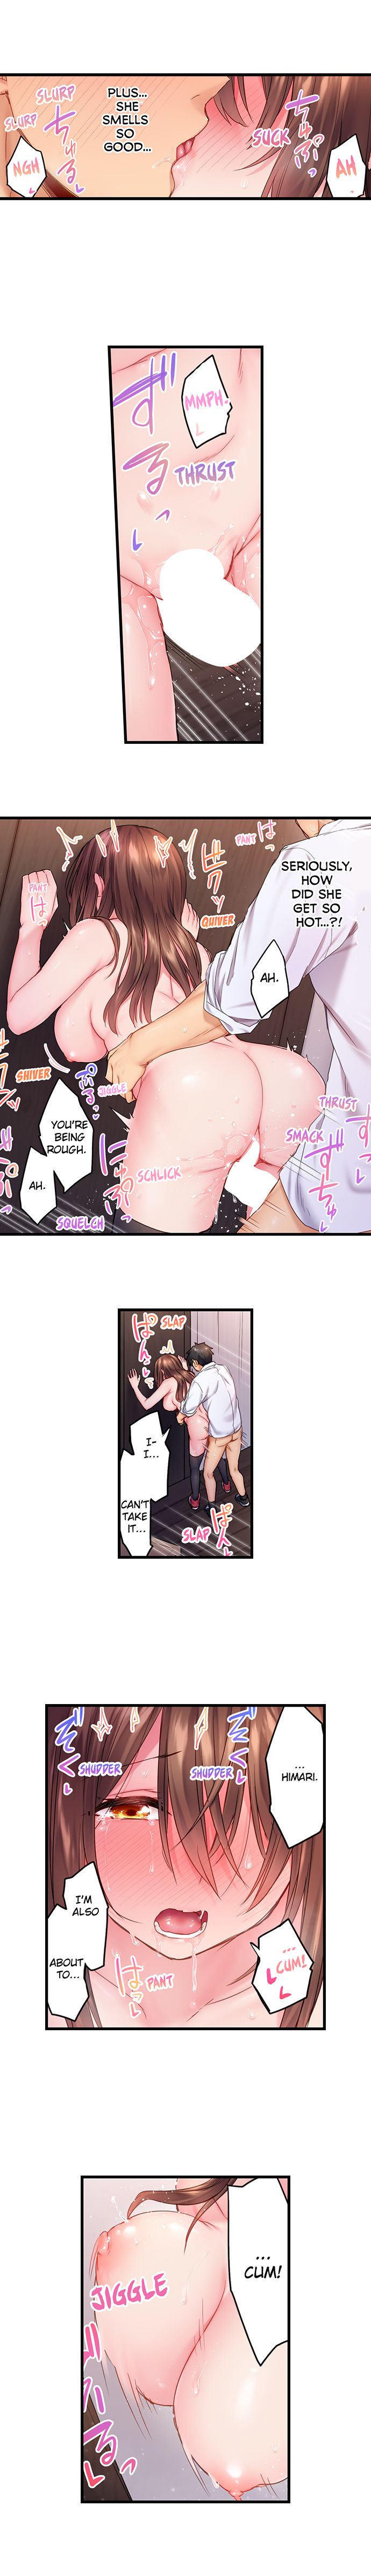 Can’t Believe My Loner Childhood Friend Became This Sexy Girl - Chapter 6 Page 7